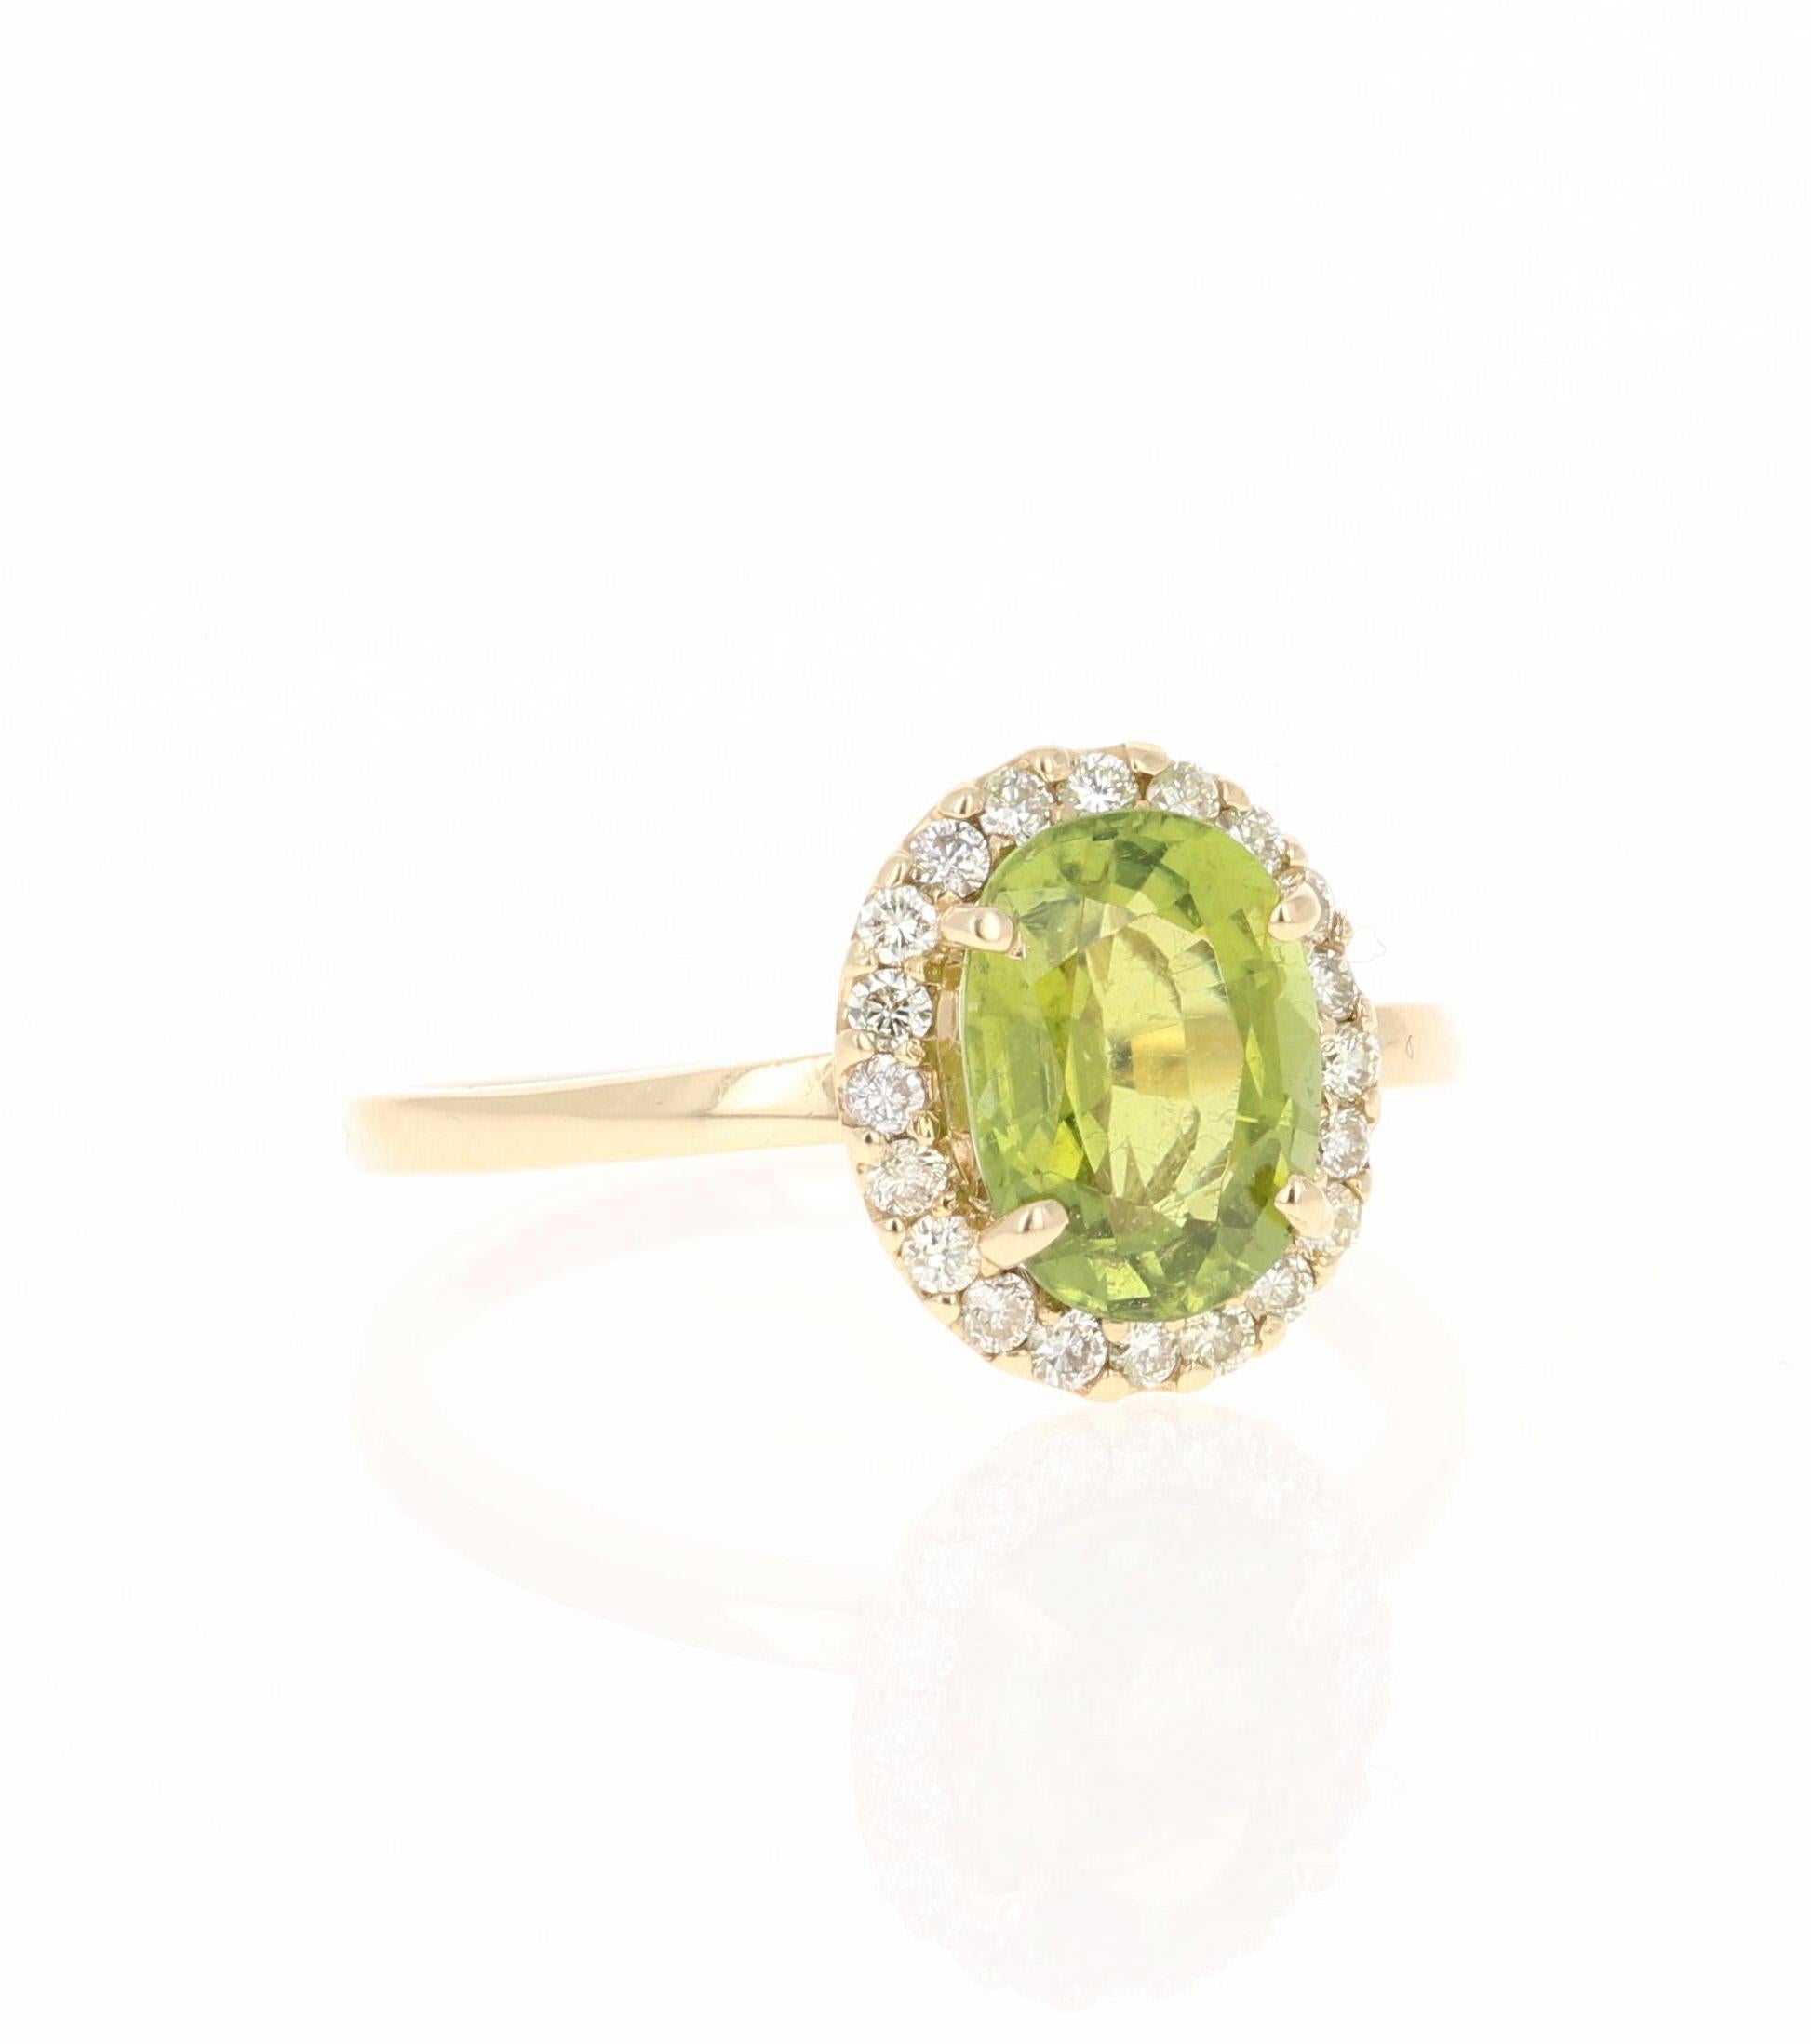 This Tourmaline and Diamond Ring has a 1.91 Carat Oval Cut light green Tourmaline set in the center and has 20 Round Cut Diamonds weighing 0.25 Carats.  The Clarity and Color of the diamonds is SI1/ F.
The total carat weight of the ring is 2.16